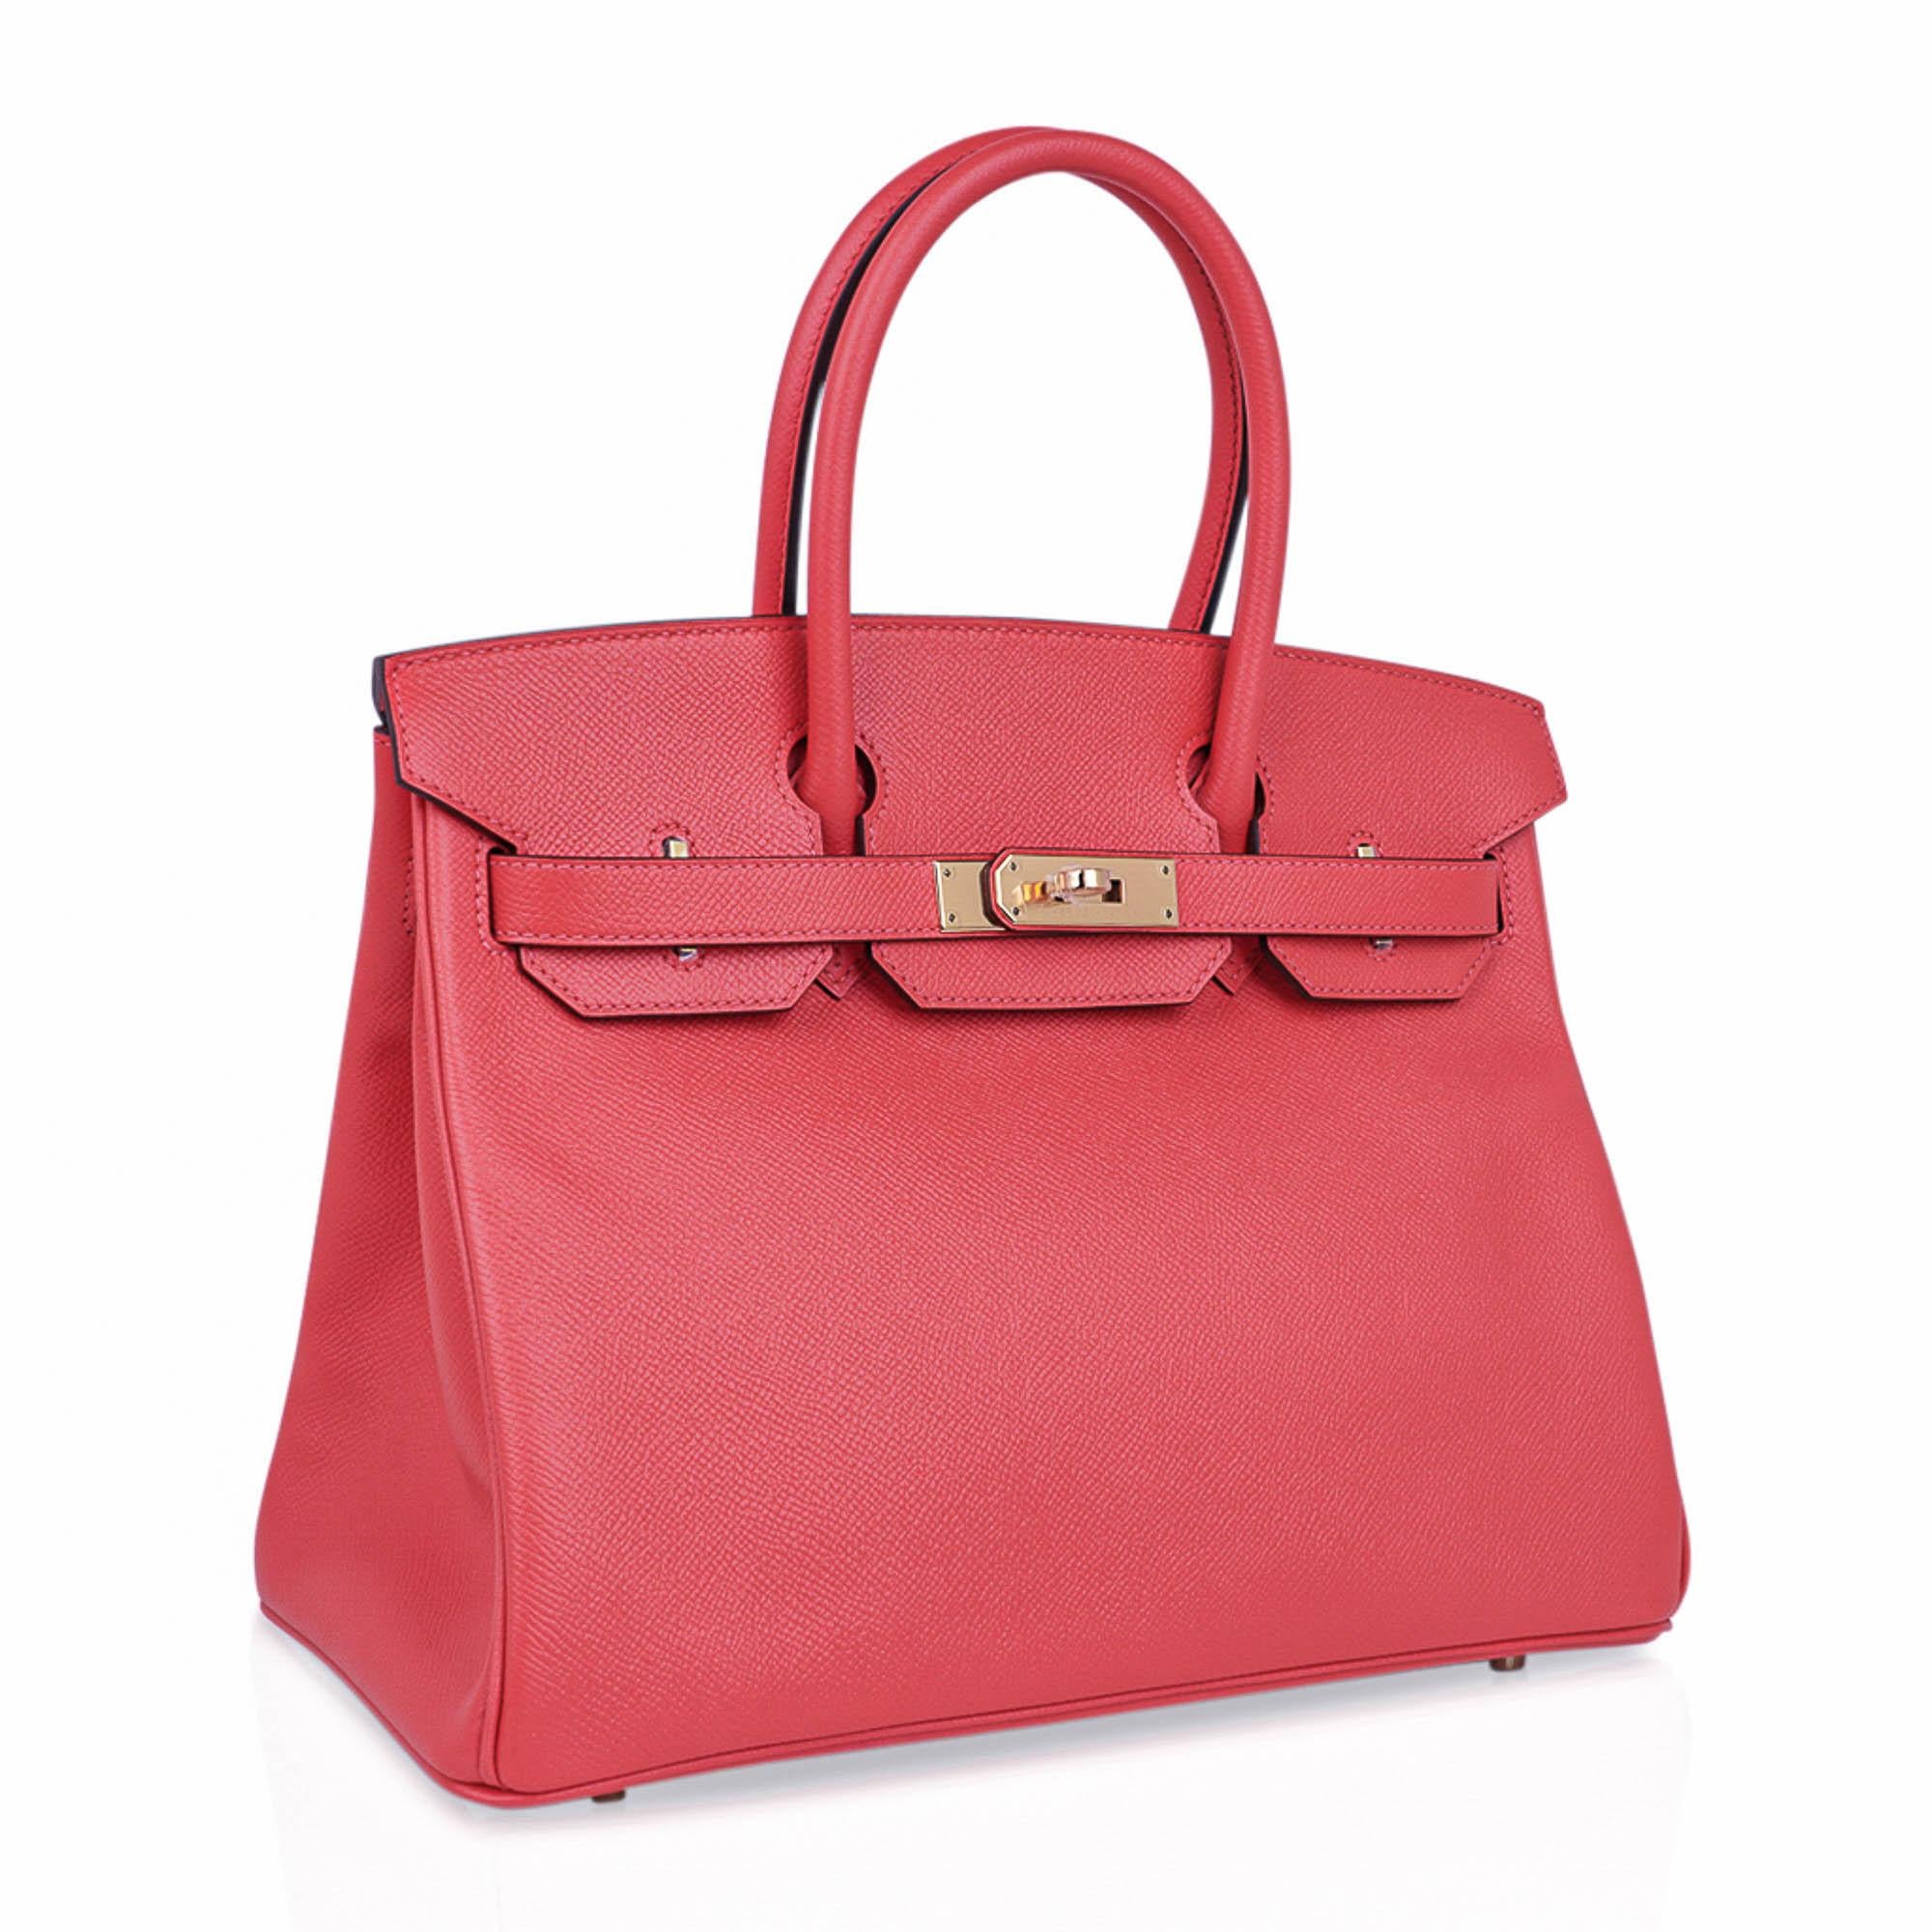 Mightychic offers an Hermes Birkin 30 bag in soft pretty pink Rose Jaipur.
This rare to find beautiful coral pink colour is a blend of orange, pink and red and evokes the sunset.
Epsom leather reveals the world of Hermes colours to perfection, is